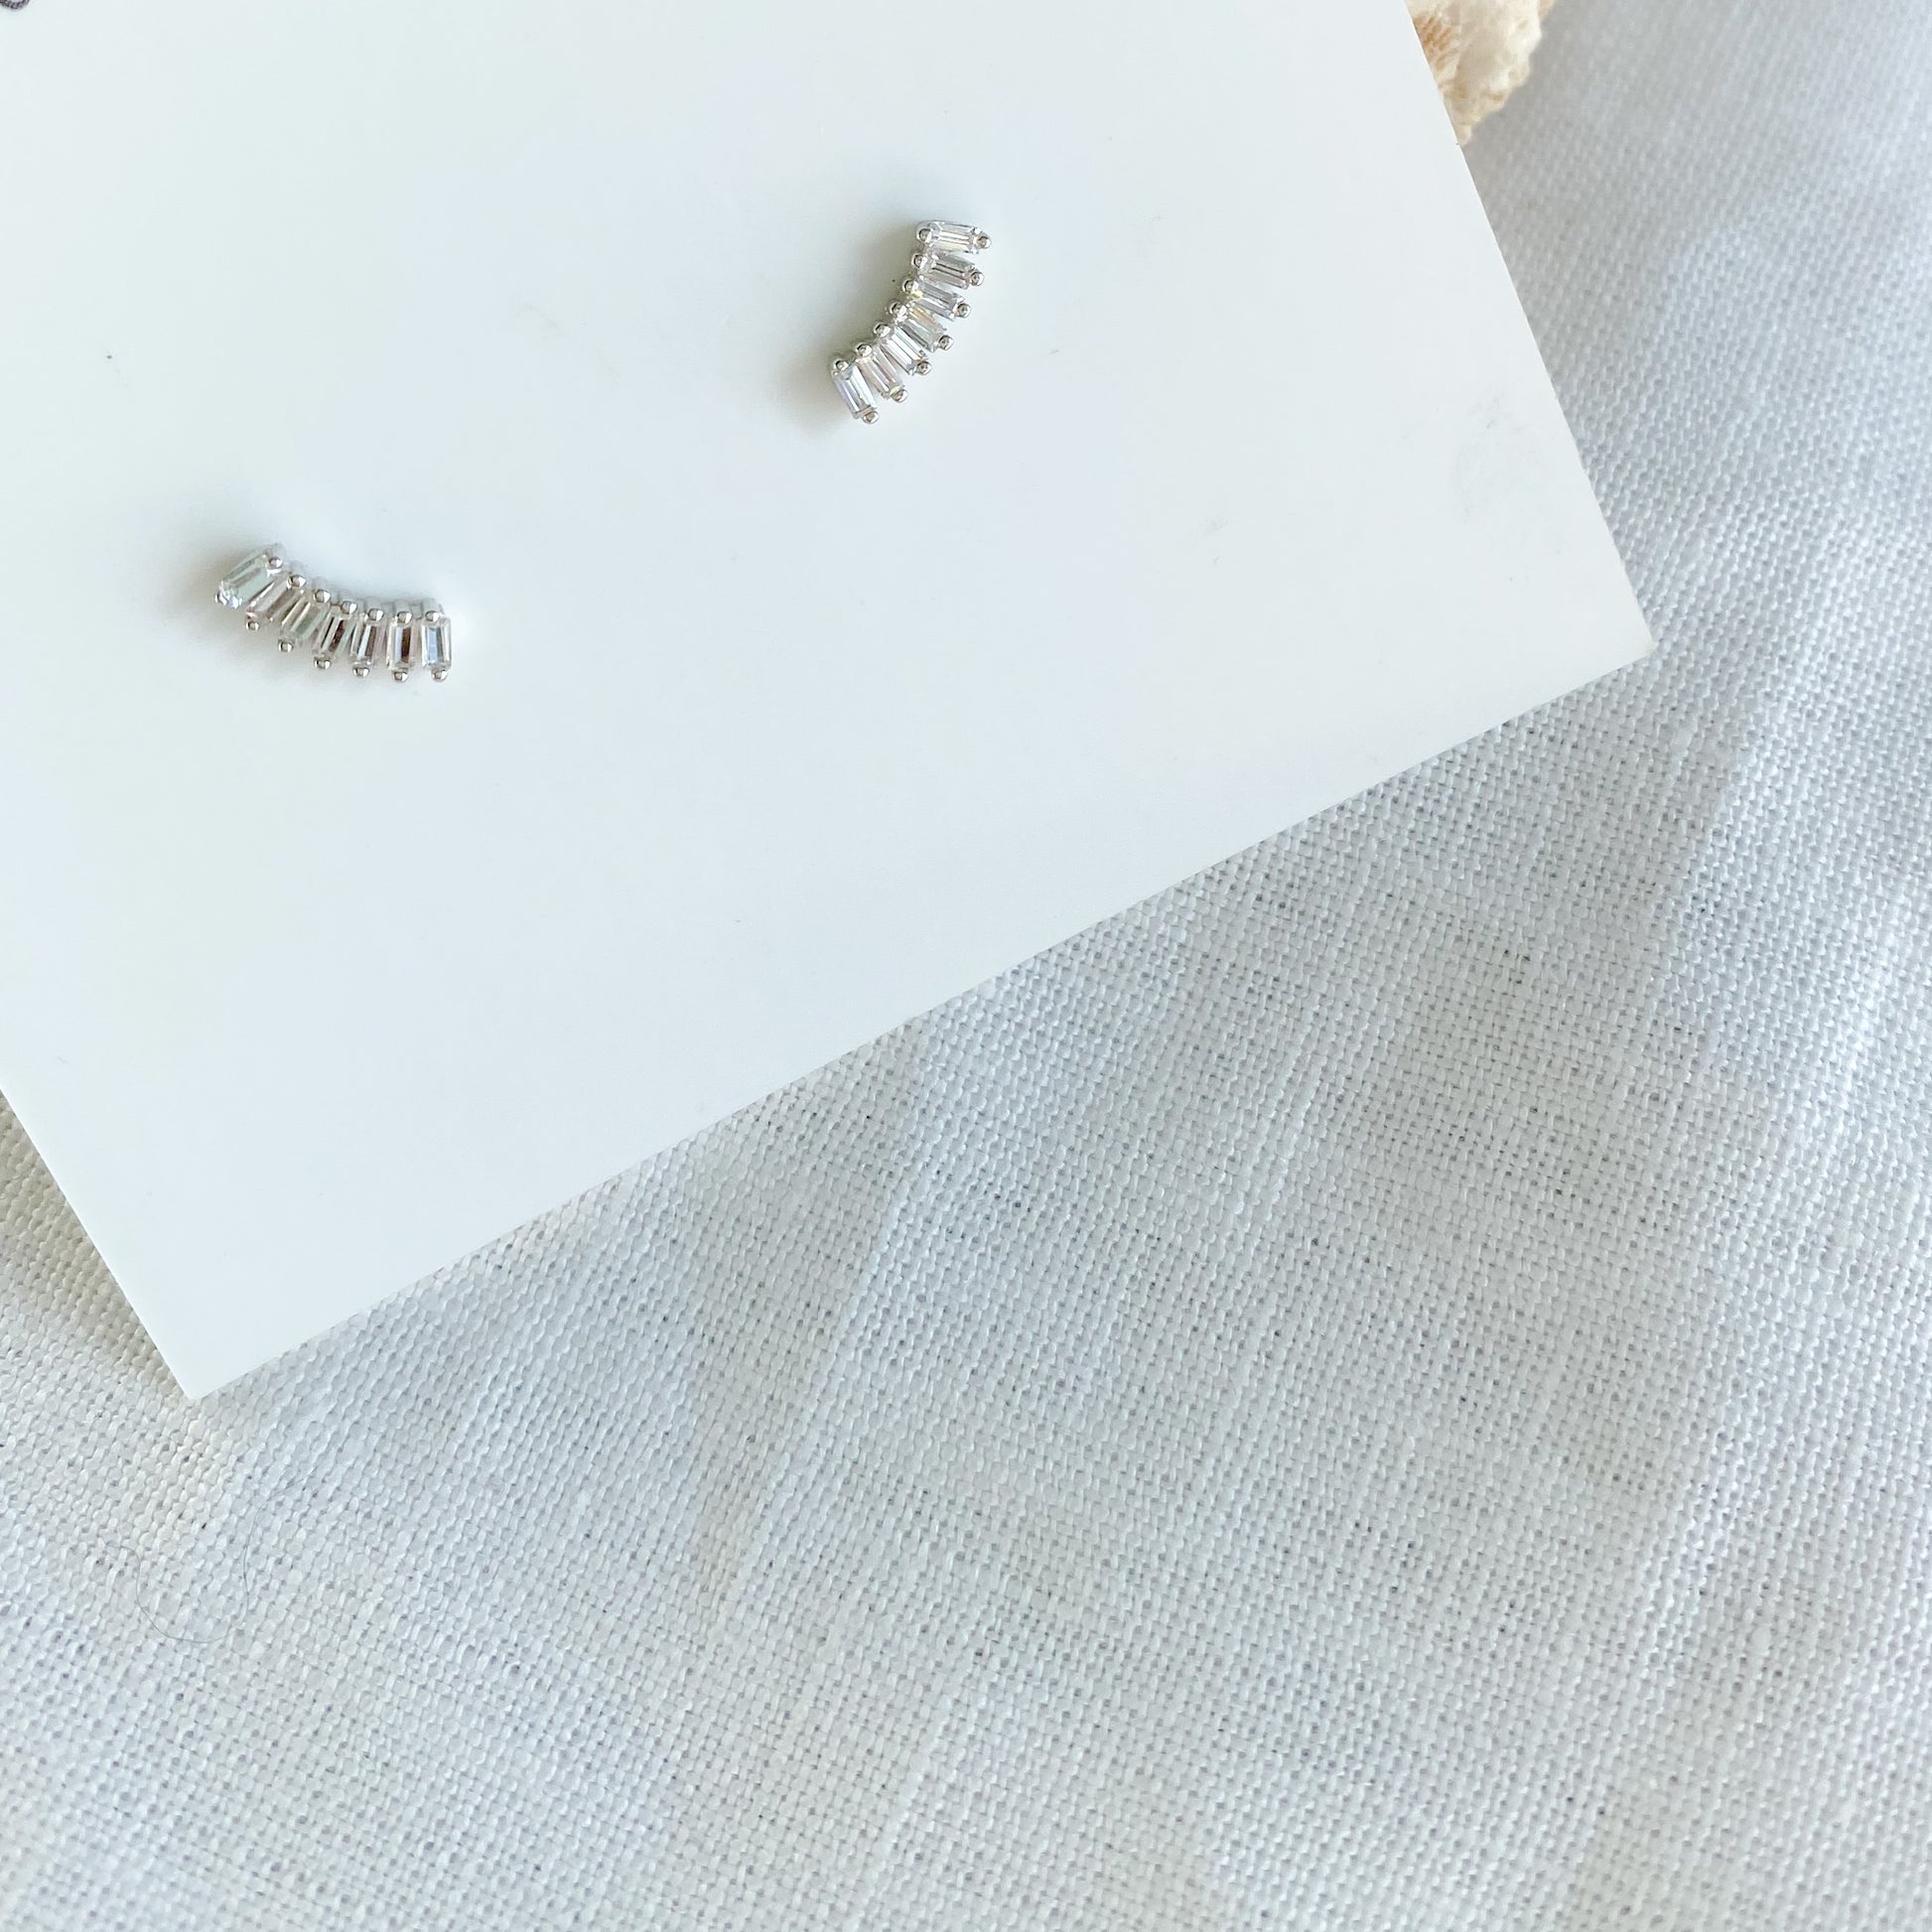 Crescent Stud earrings - Bellestyle sterling silver gold baguette crystal post everyday